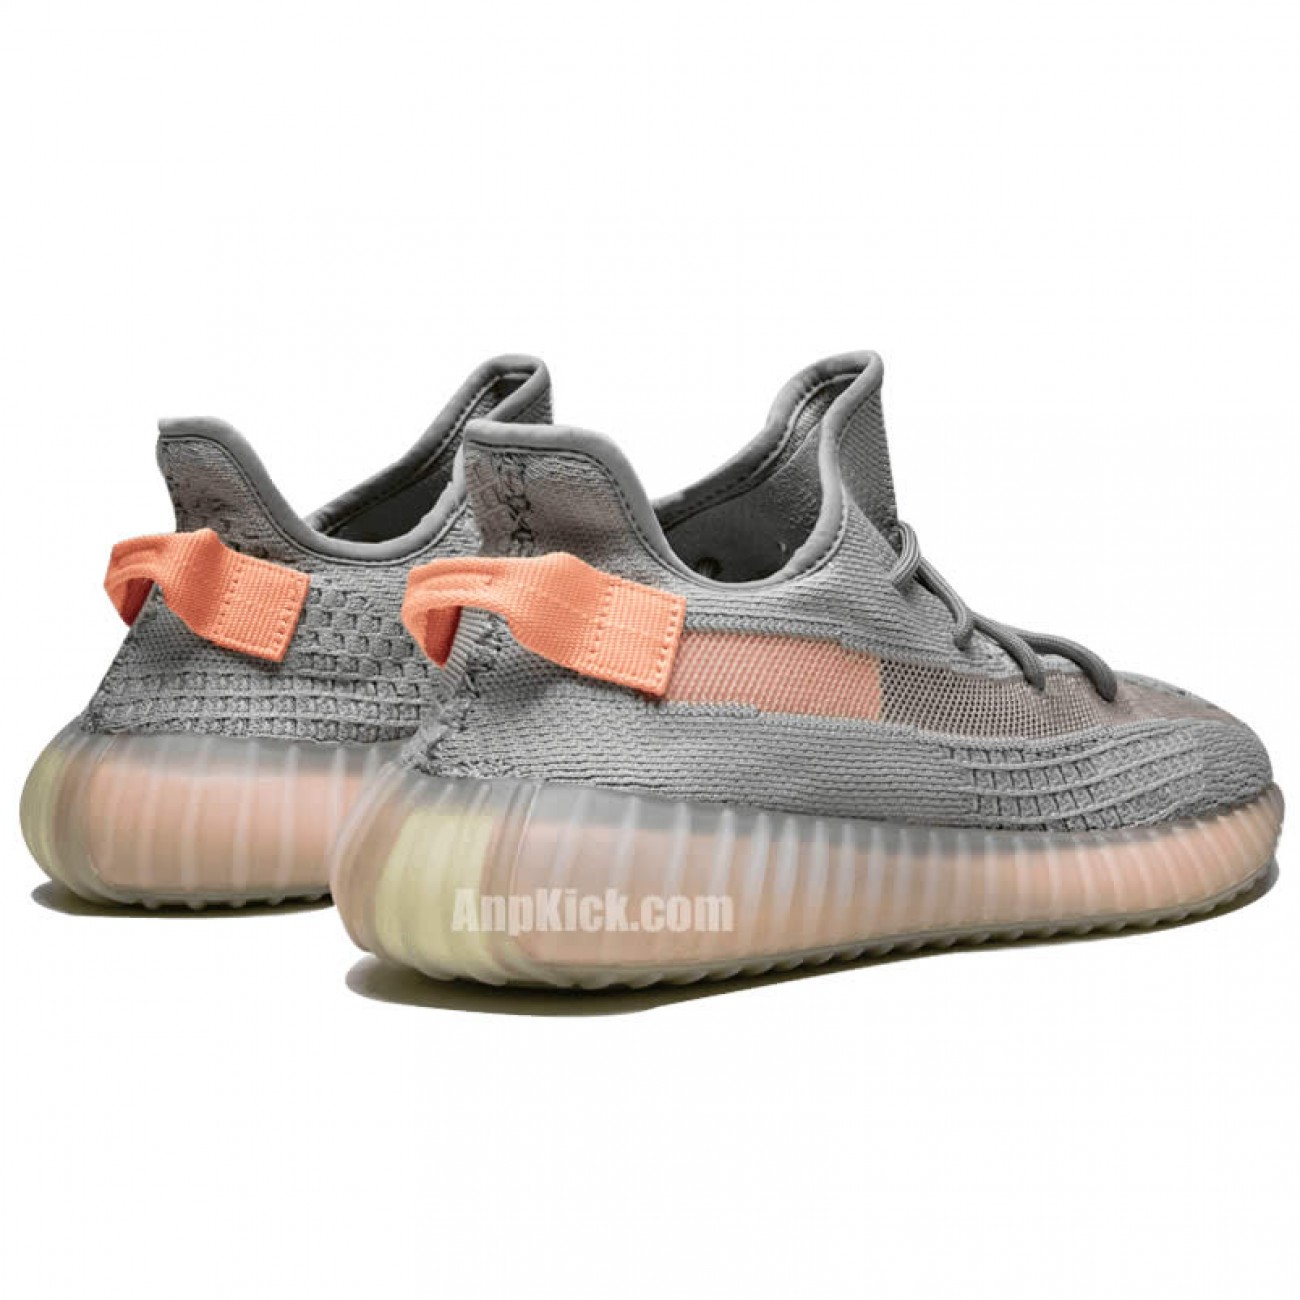 adidas Yeezy Boost 350 V2 Trfrm Grey "True Form" Outfit Price EG7492